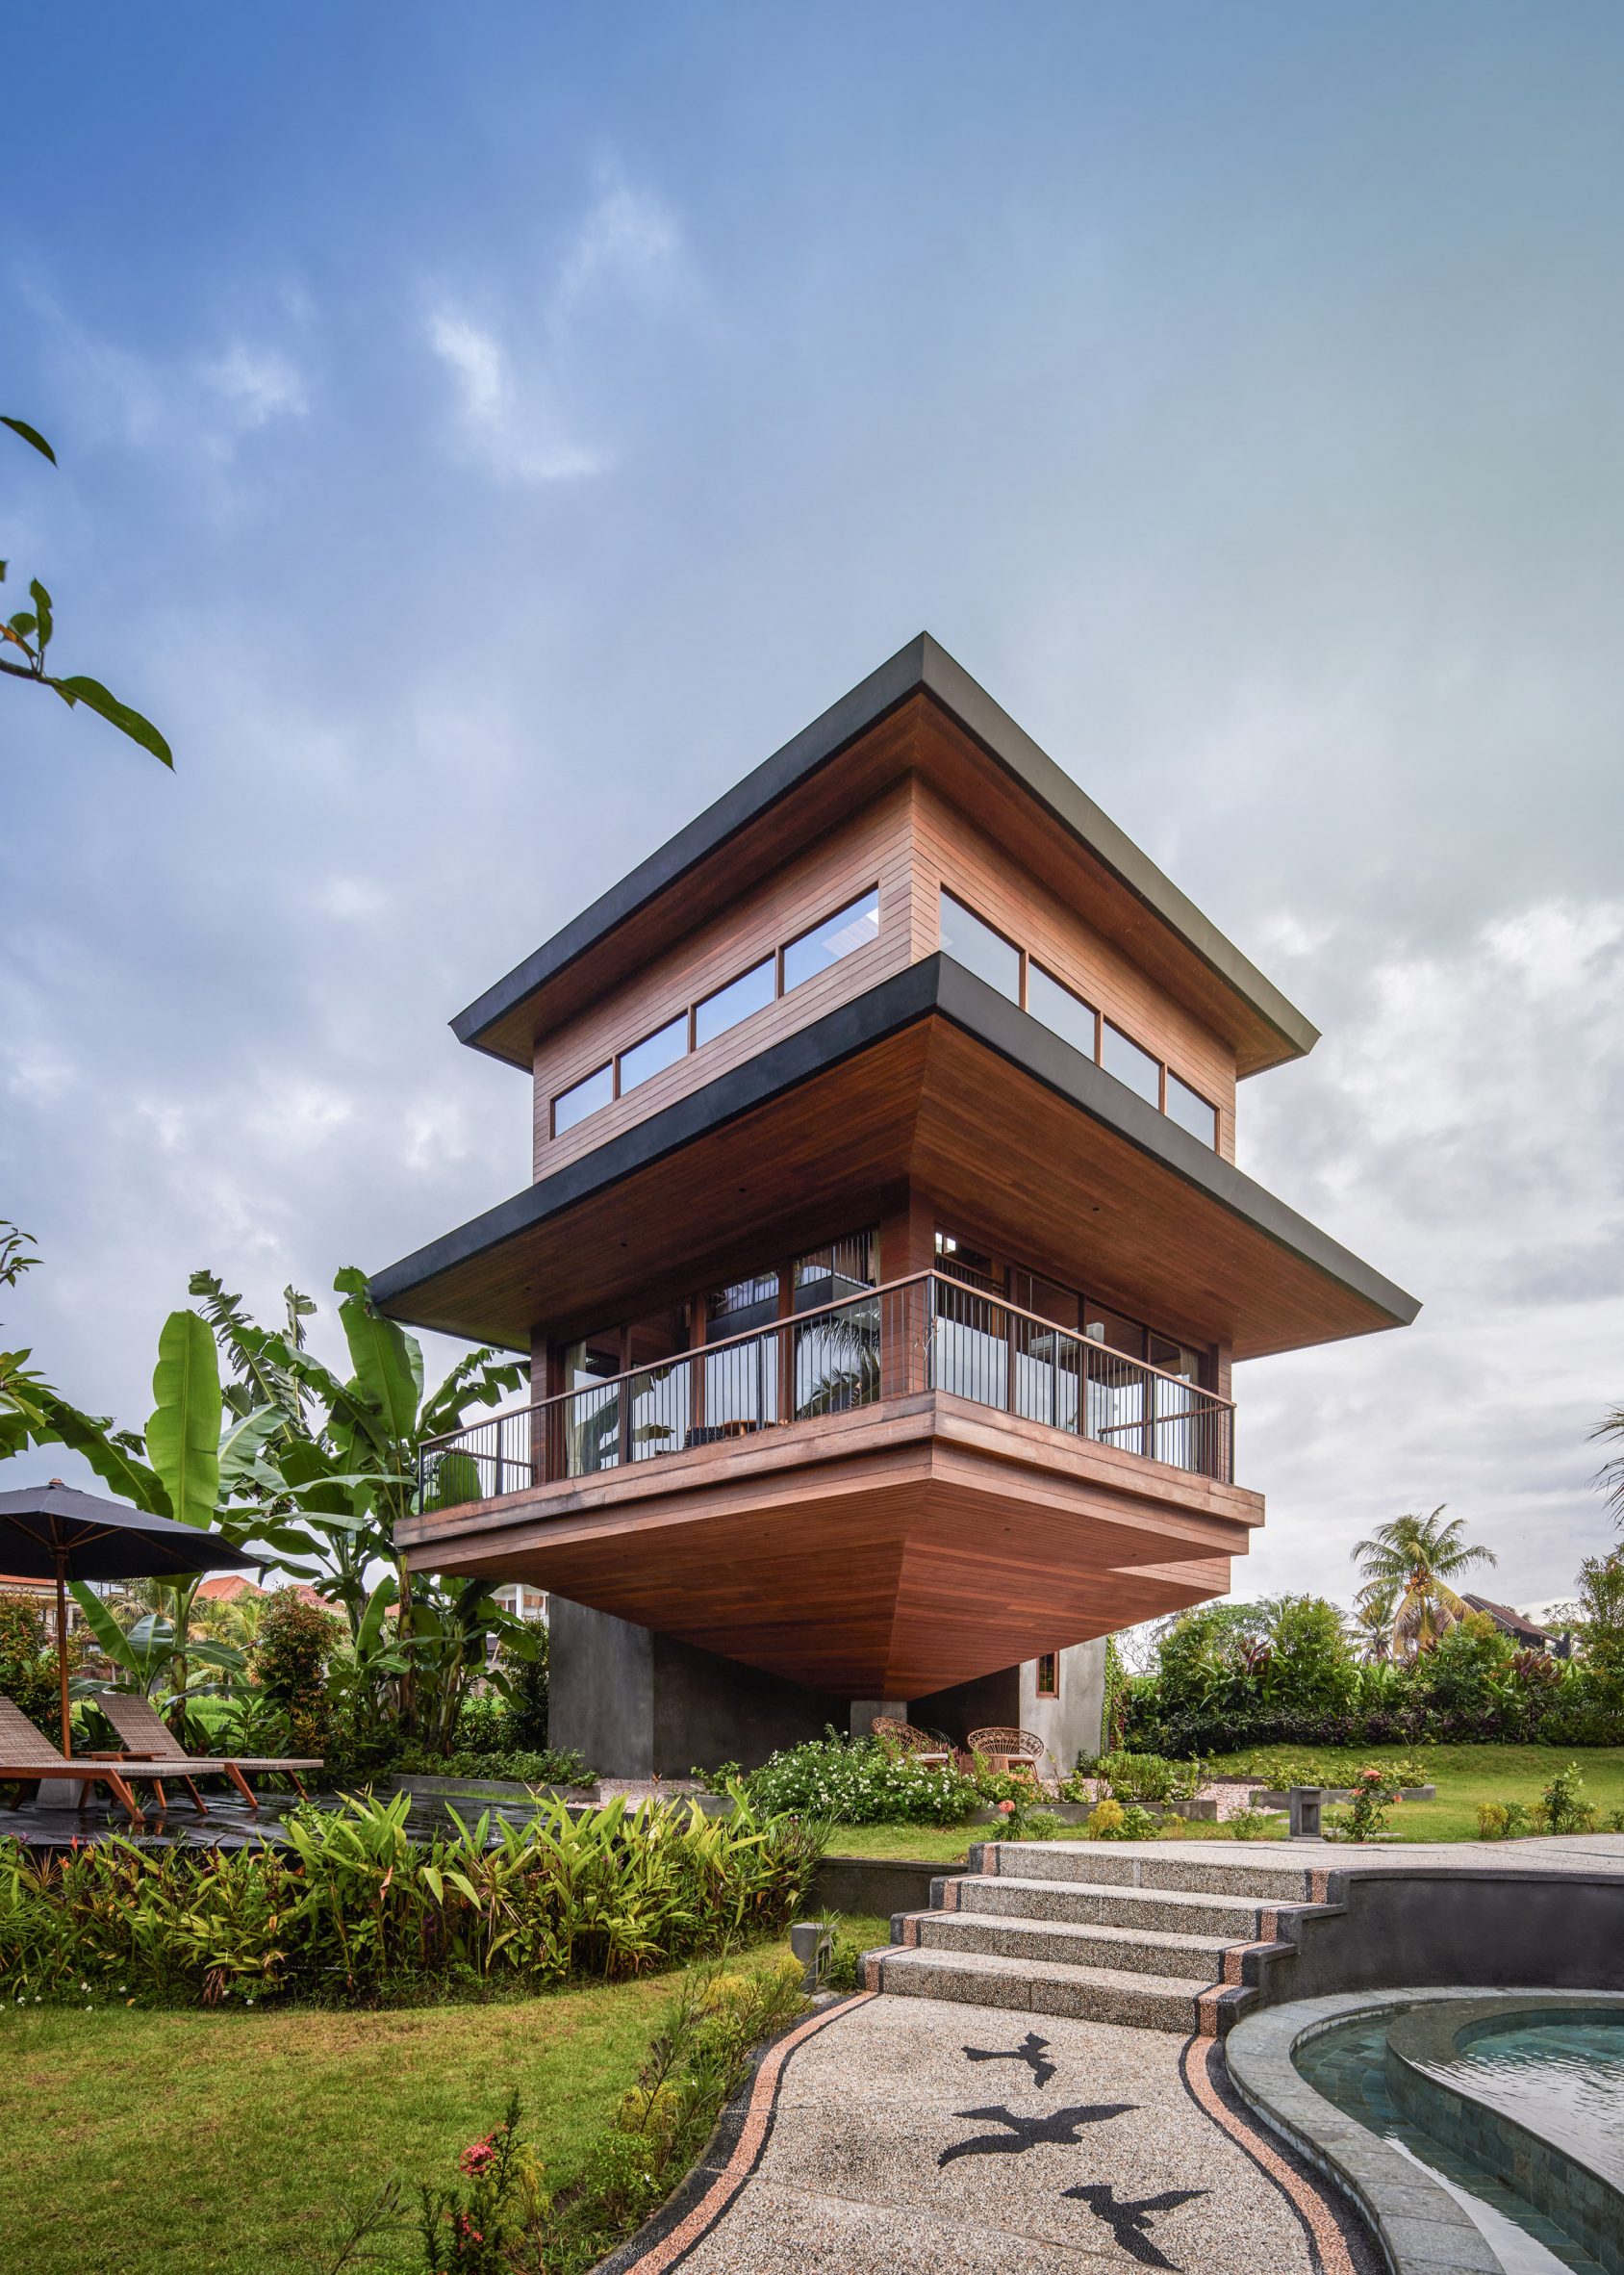 Stilted guesthouse in Bali